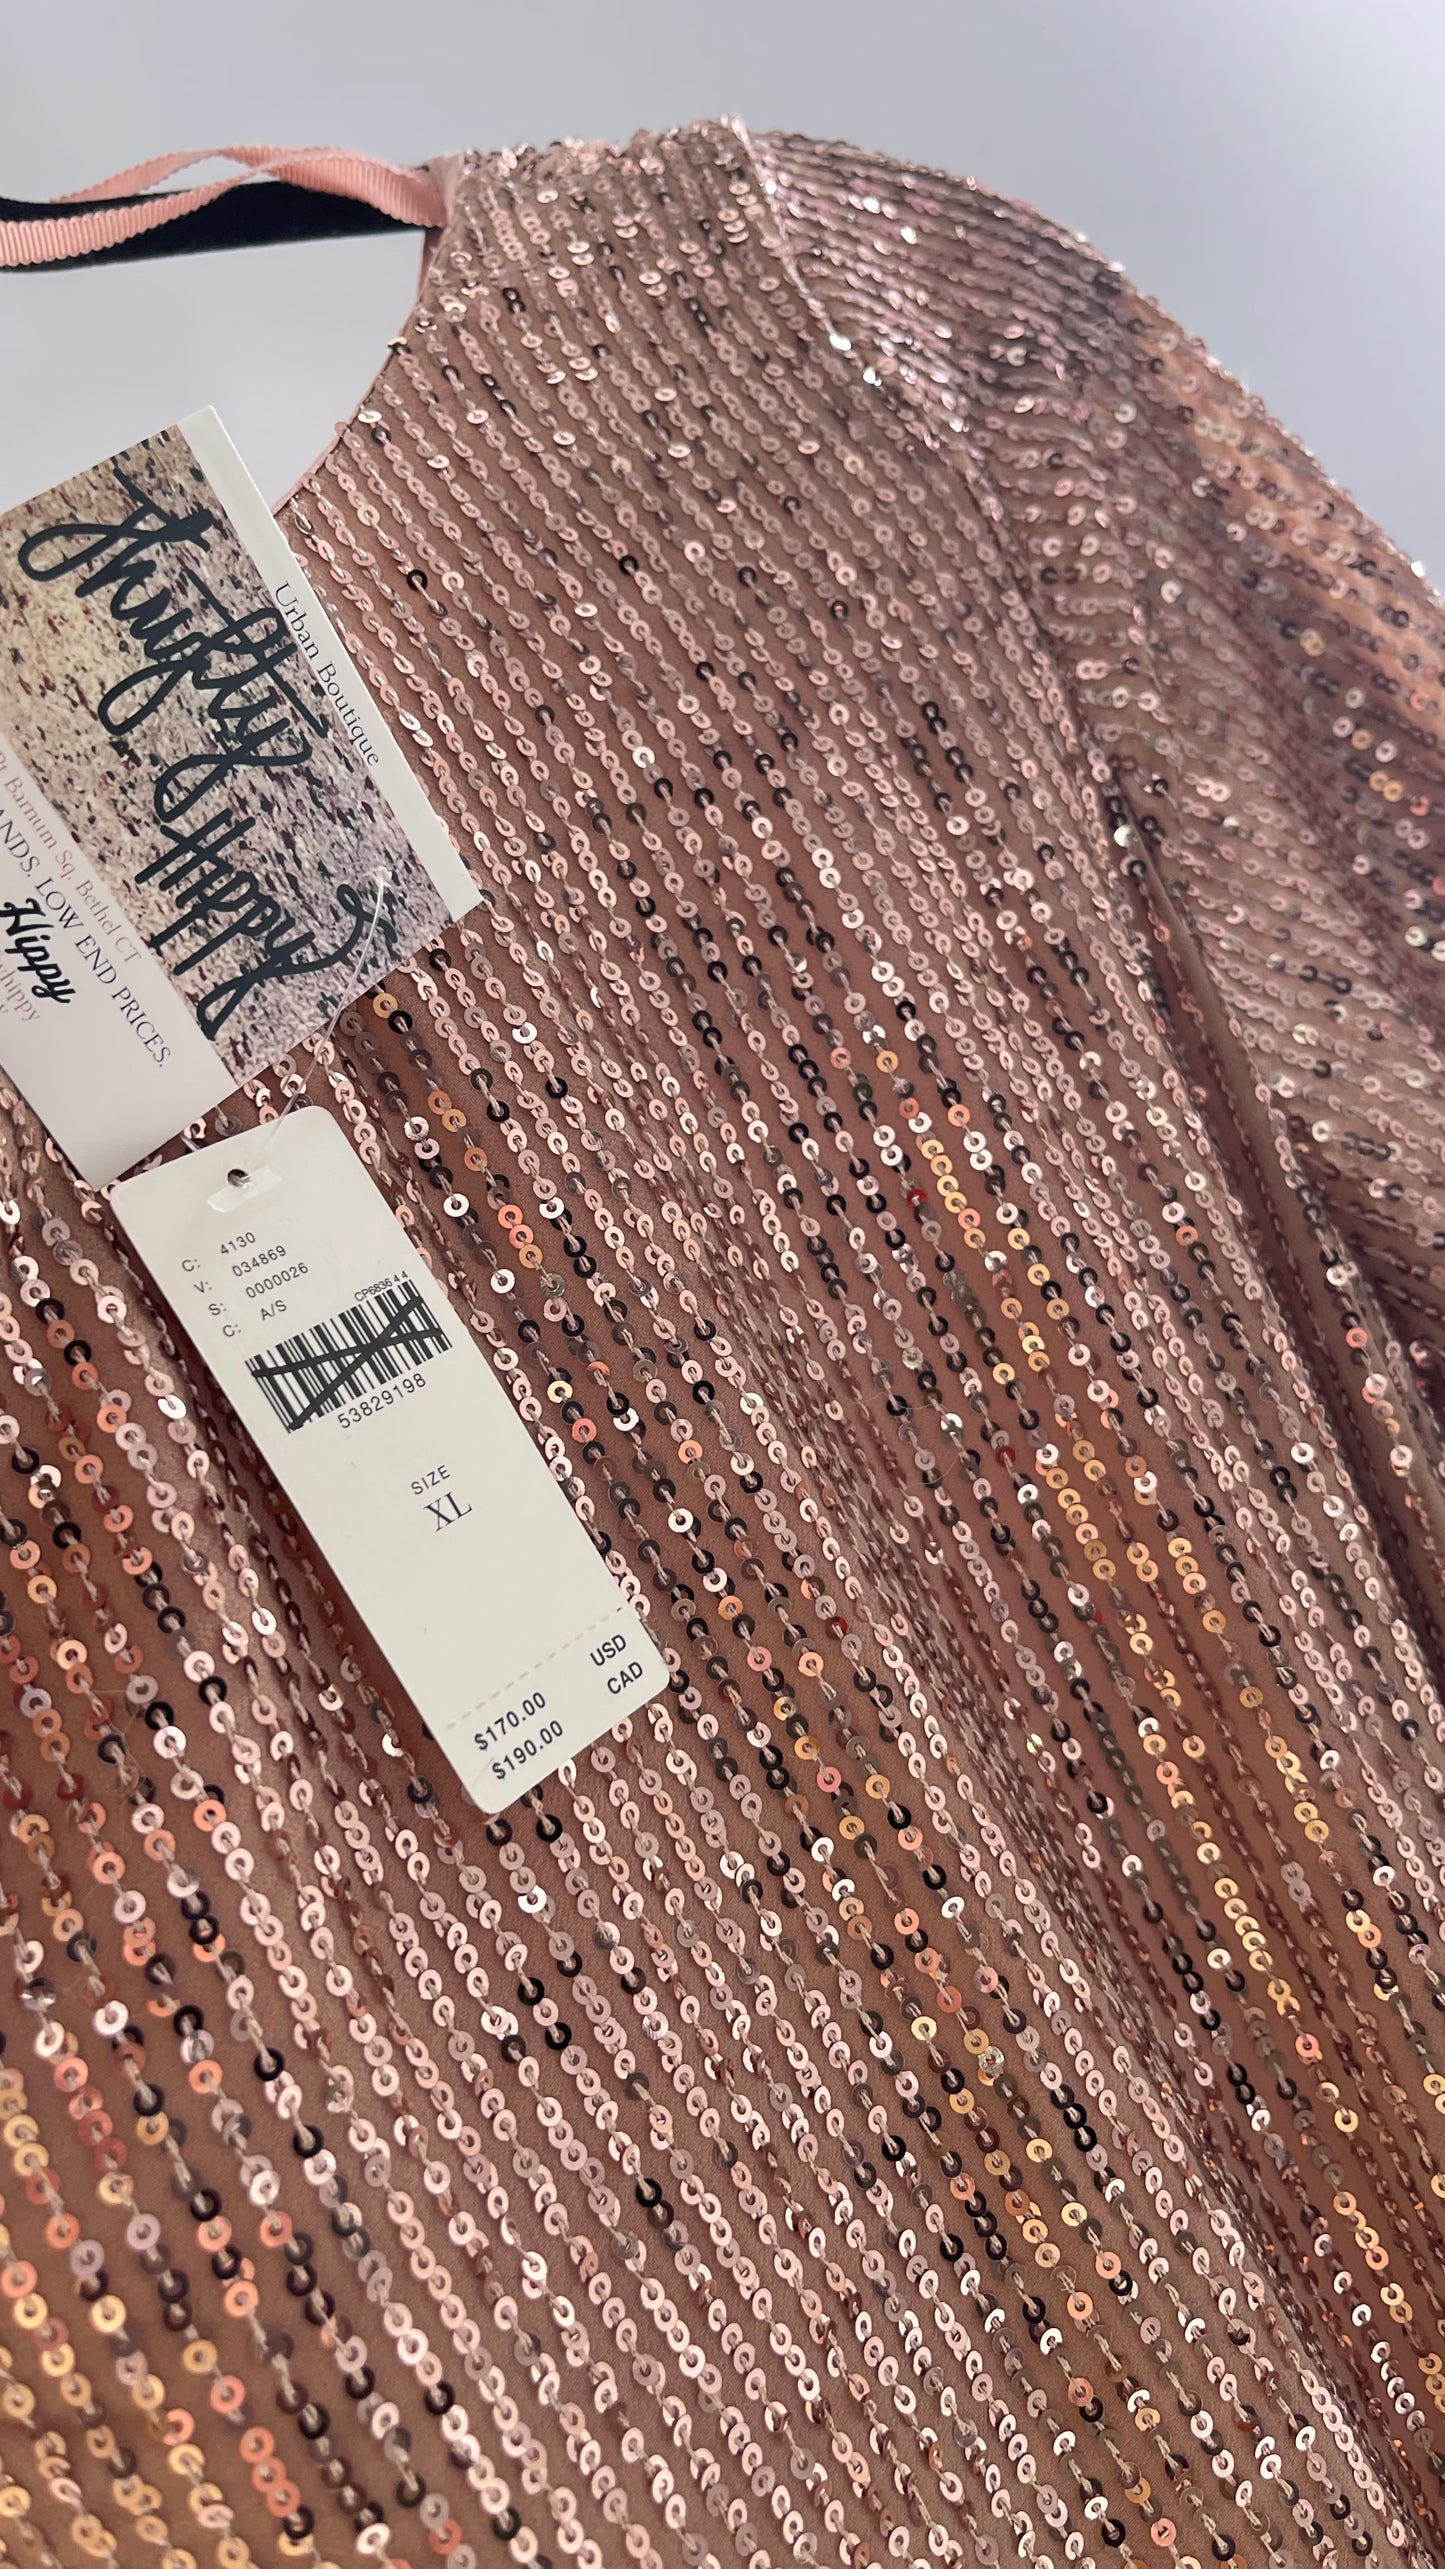 Anthropologie Rose Gold Sequin Dress with Velvet Waist Belt and Tags Attached (XL)